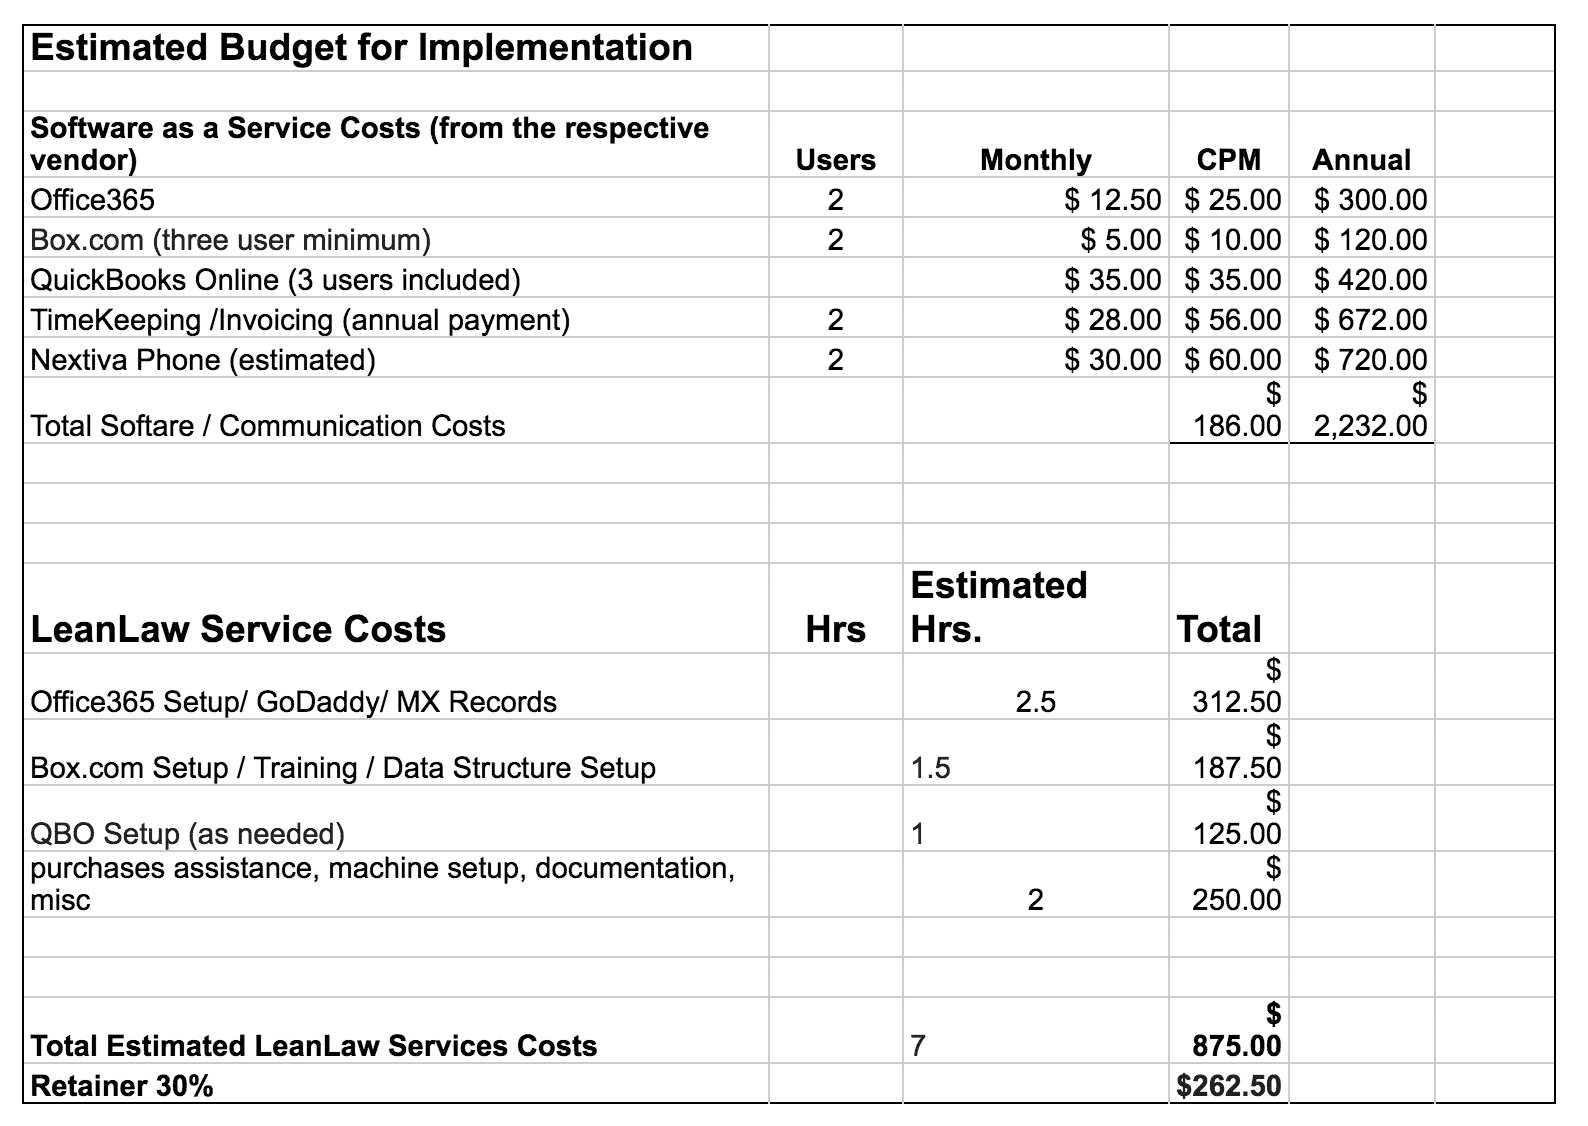 LeanLaw Estimated budget and service cost spreadsheet